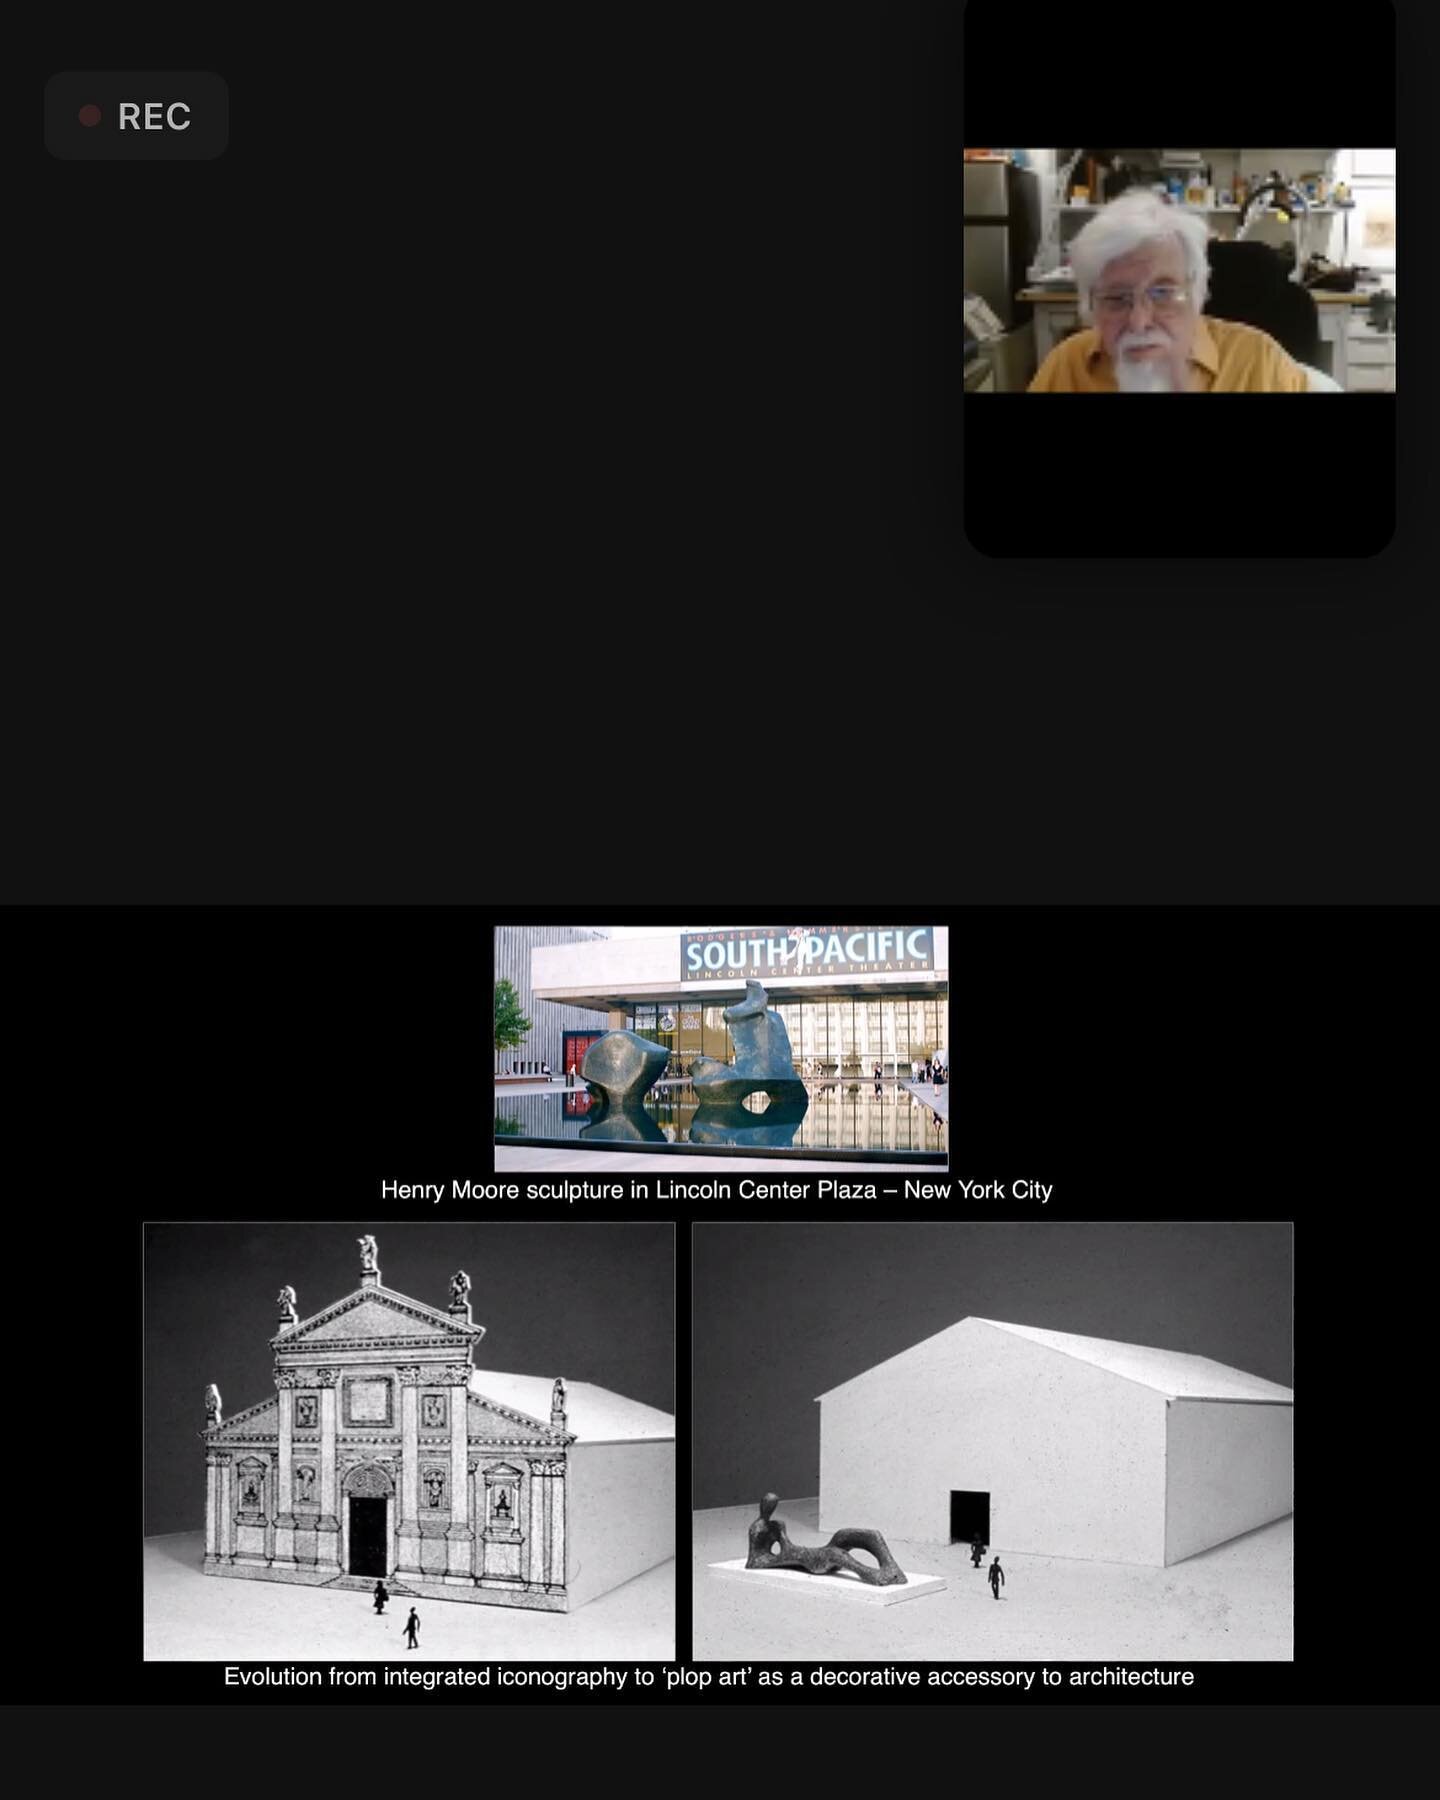 Lesson for Architects: 
We attended a virtual lecture by one of our favorite architects of all time, James Wines. His presentation was compelling and riddled with stimulating graphics. Thank you for reminding us that buildings used to communicate and